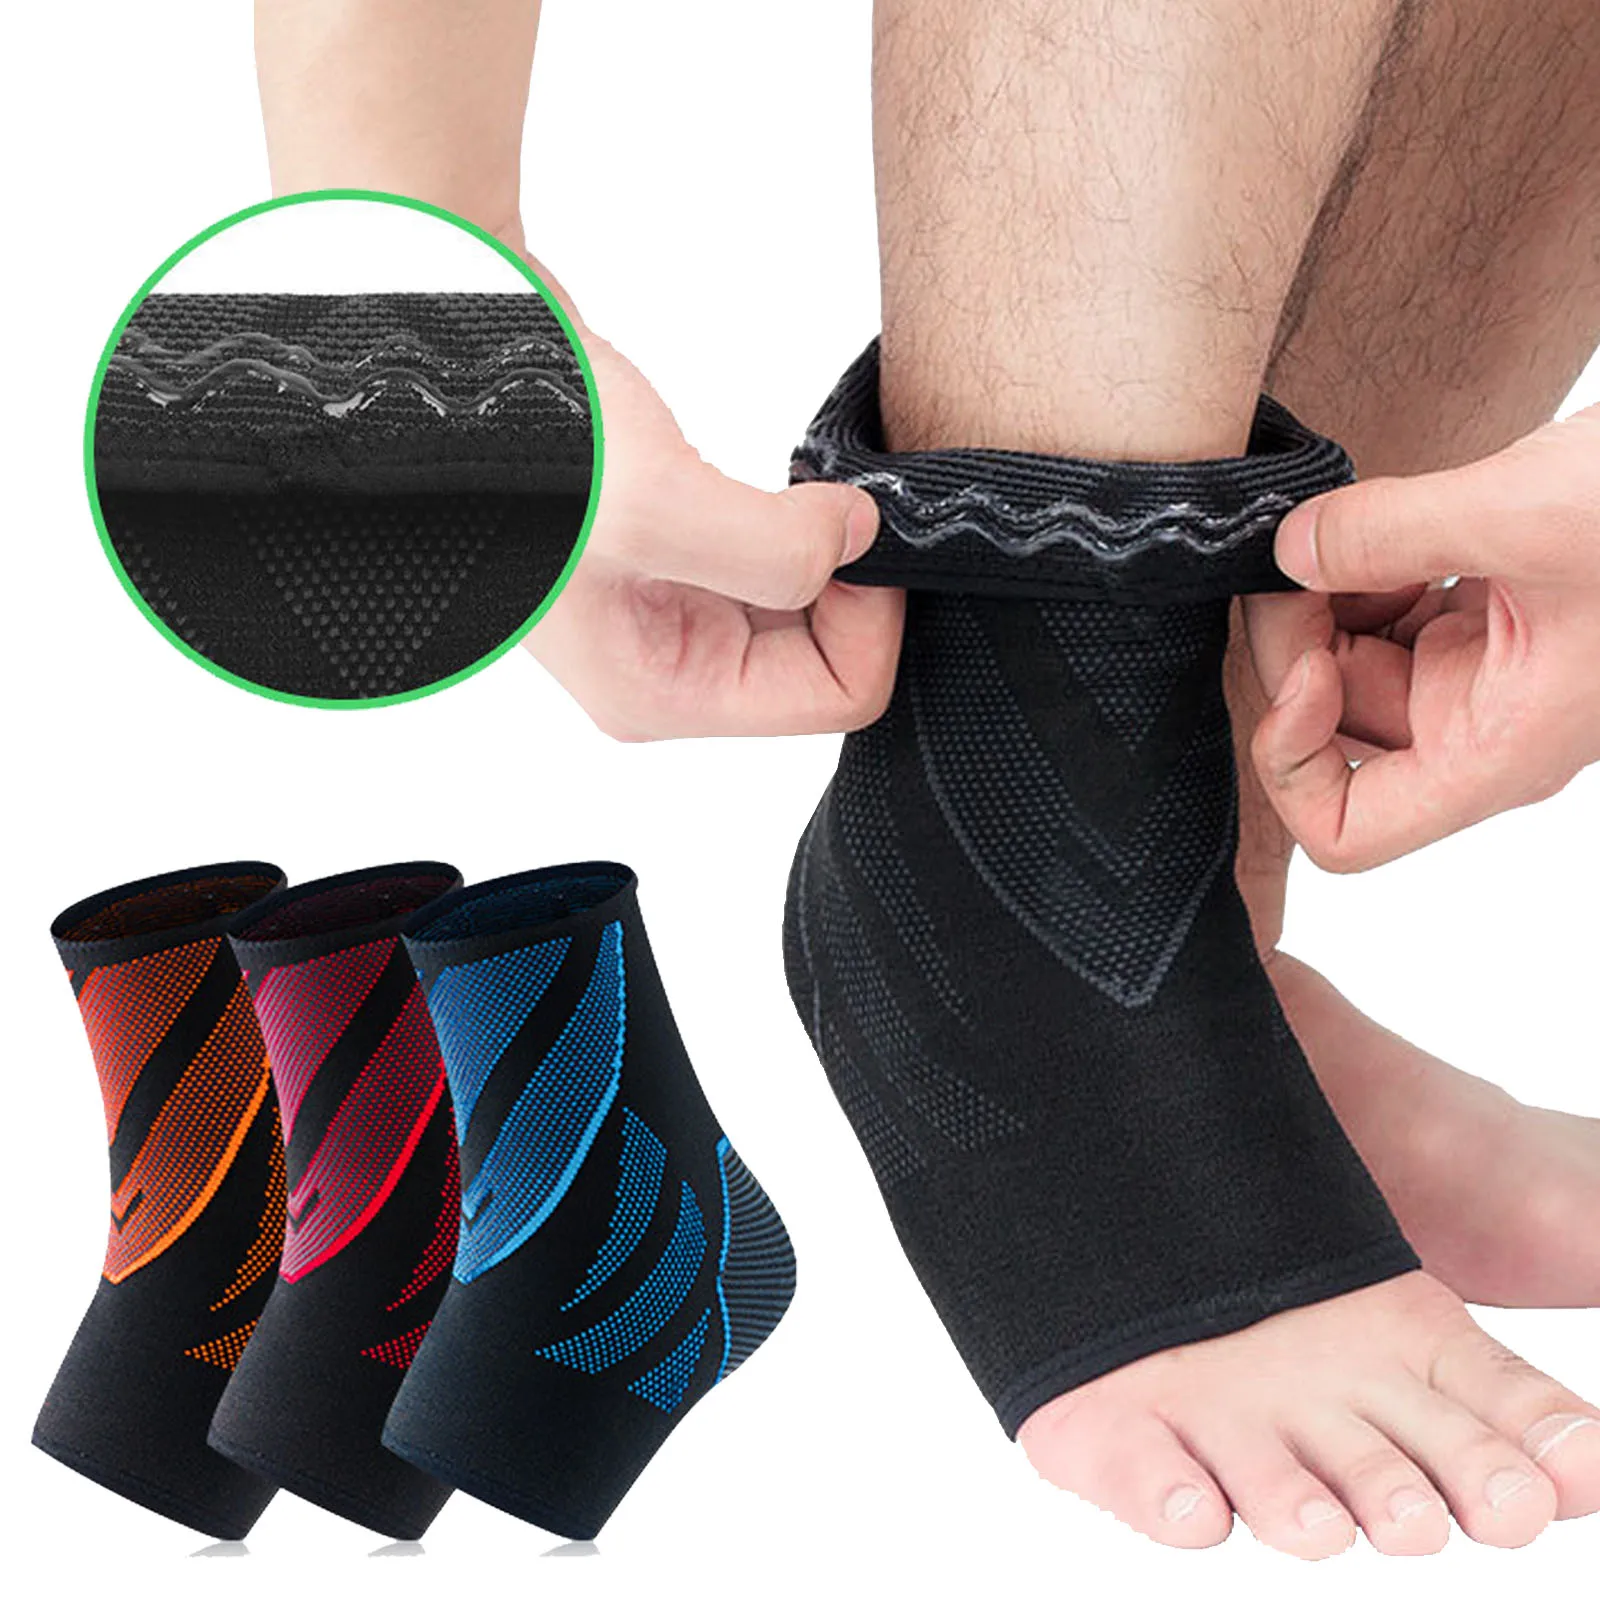 1Pairs Ankle Brace Compression Sleeves for Football Ankle Support Socks Injury Recovery Joint Pain Plantar Fasciitis Protector kuangmi silicone pads ankle support 2 pcs sports safety breathable compression sleeve brace basketball football ankle protector